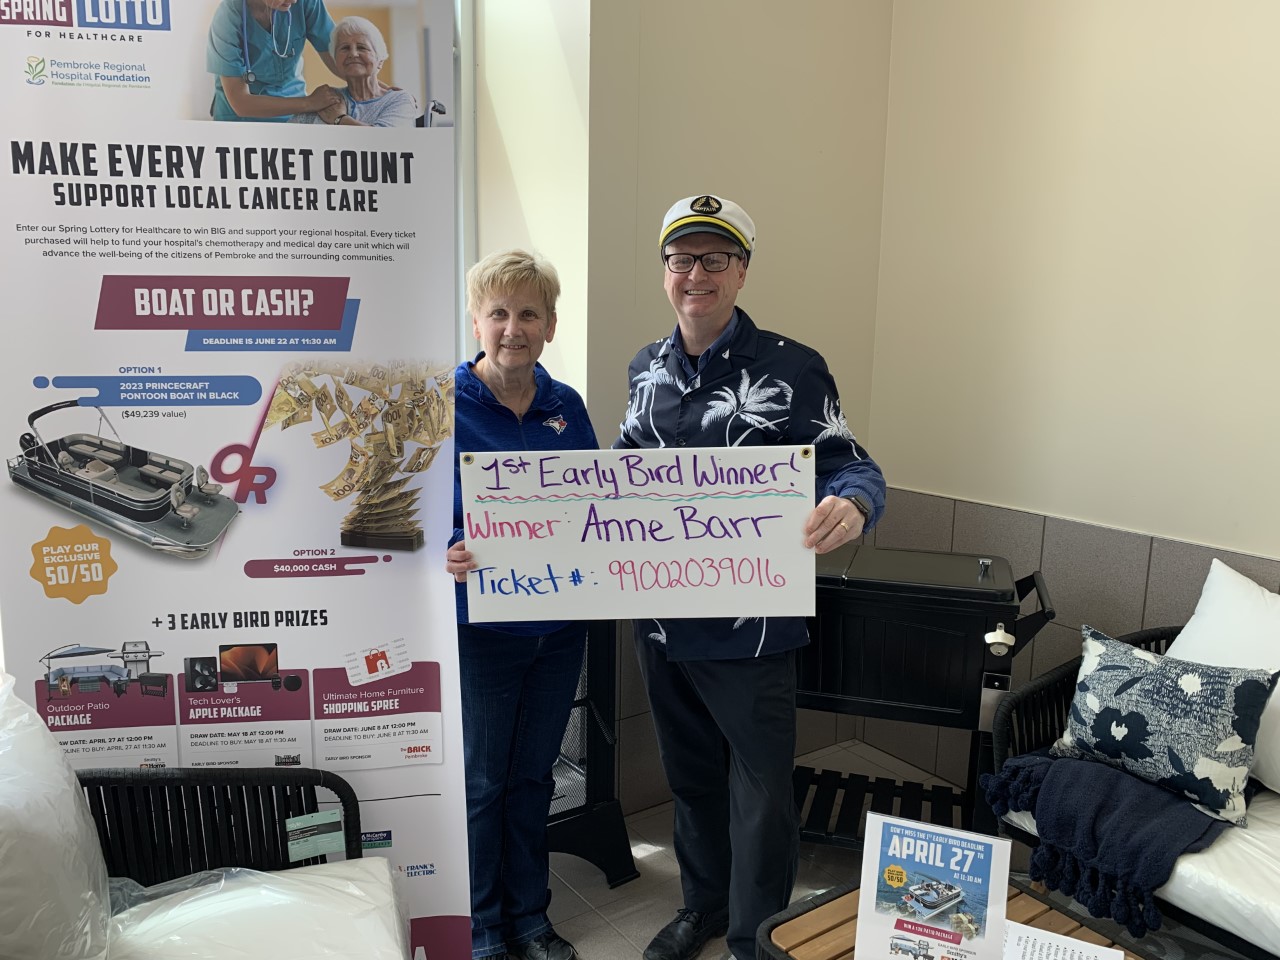 You are currently viewing The Pembroke Regional Hospital Foundation’s Spring Lotto for Local Cancer Care Announces First Early Bird Draw Winner!